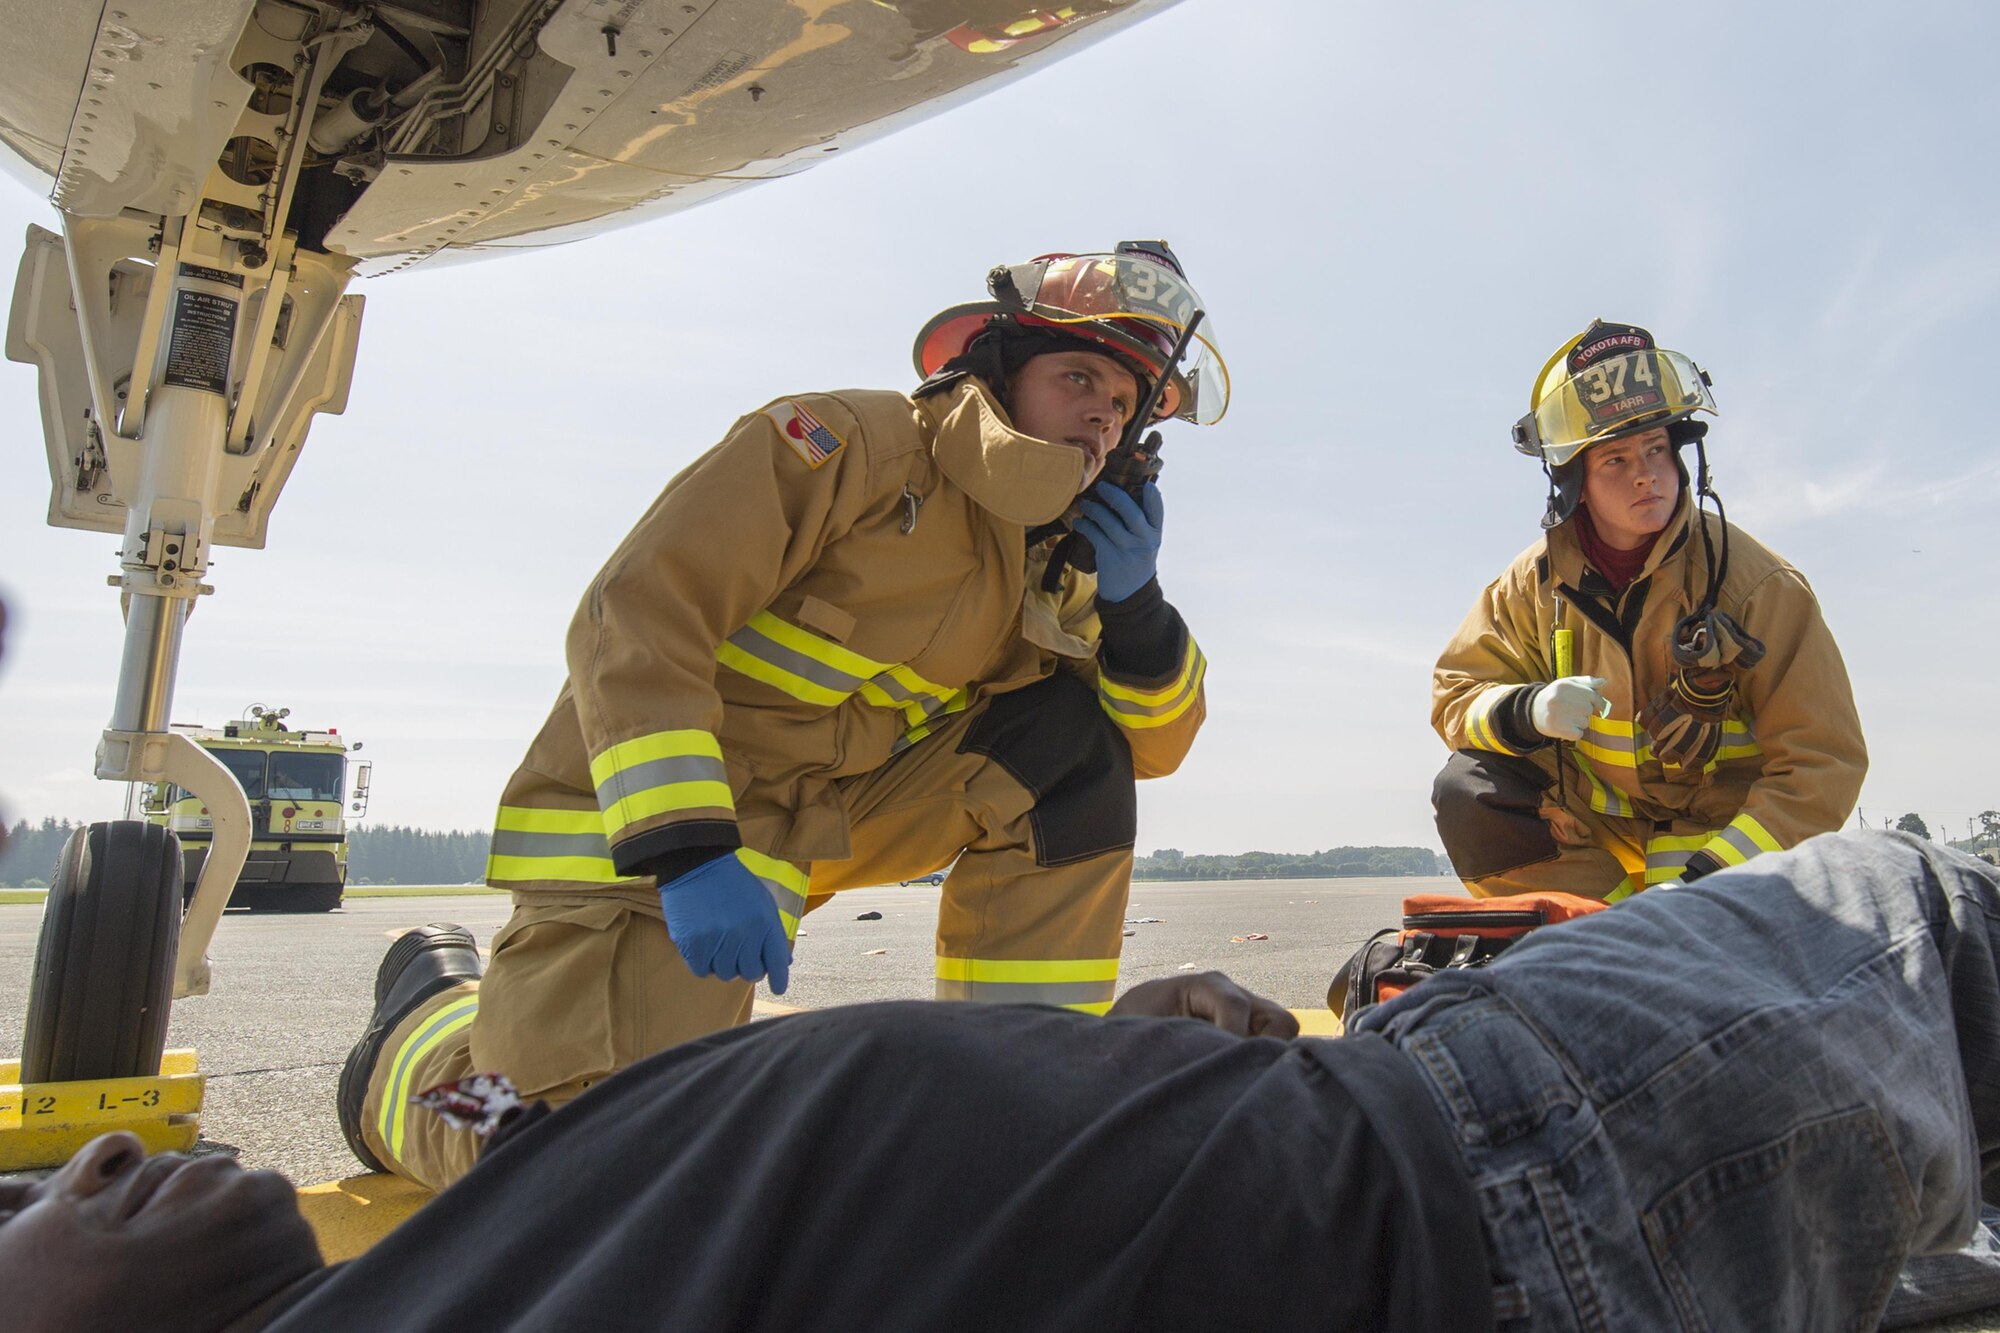 Yokota firefighters assess the situation during an Emergency Management Exercise at Yokota Air Base, Japan, July 13, 2015. Yokota conducted a Samurai Readiness Training Week to enhance readiness for real-world situations. (U.S. Air Force photo by Osakabe Yasuo/Released)